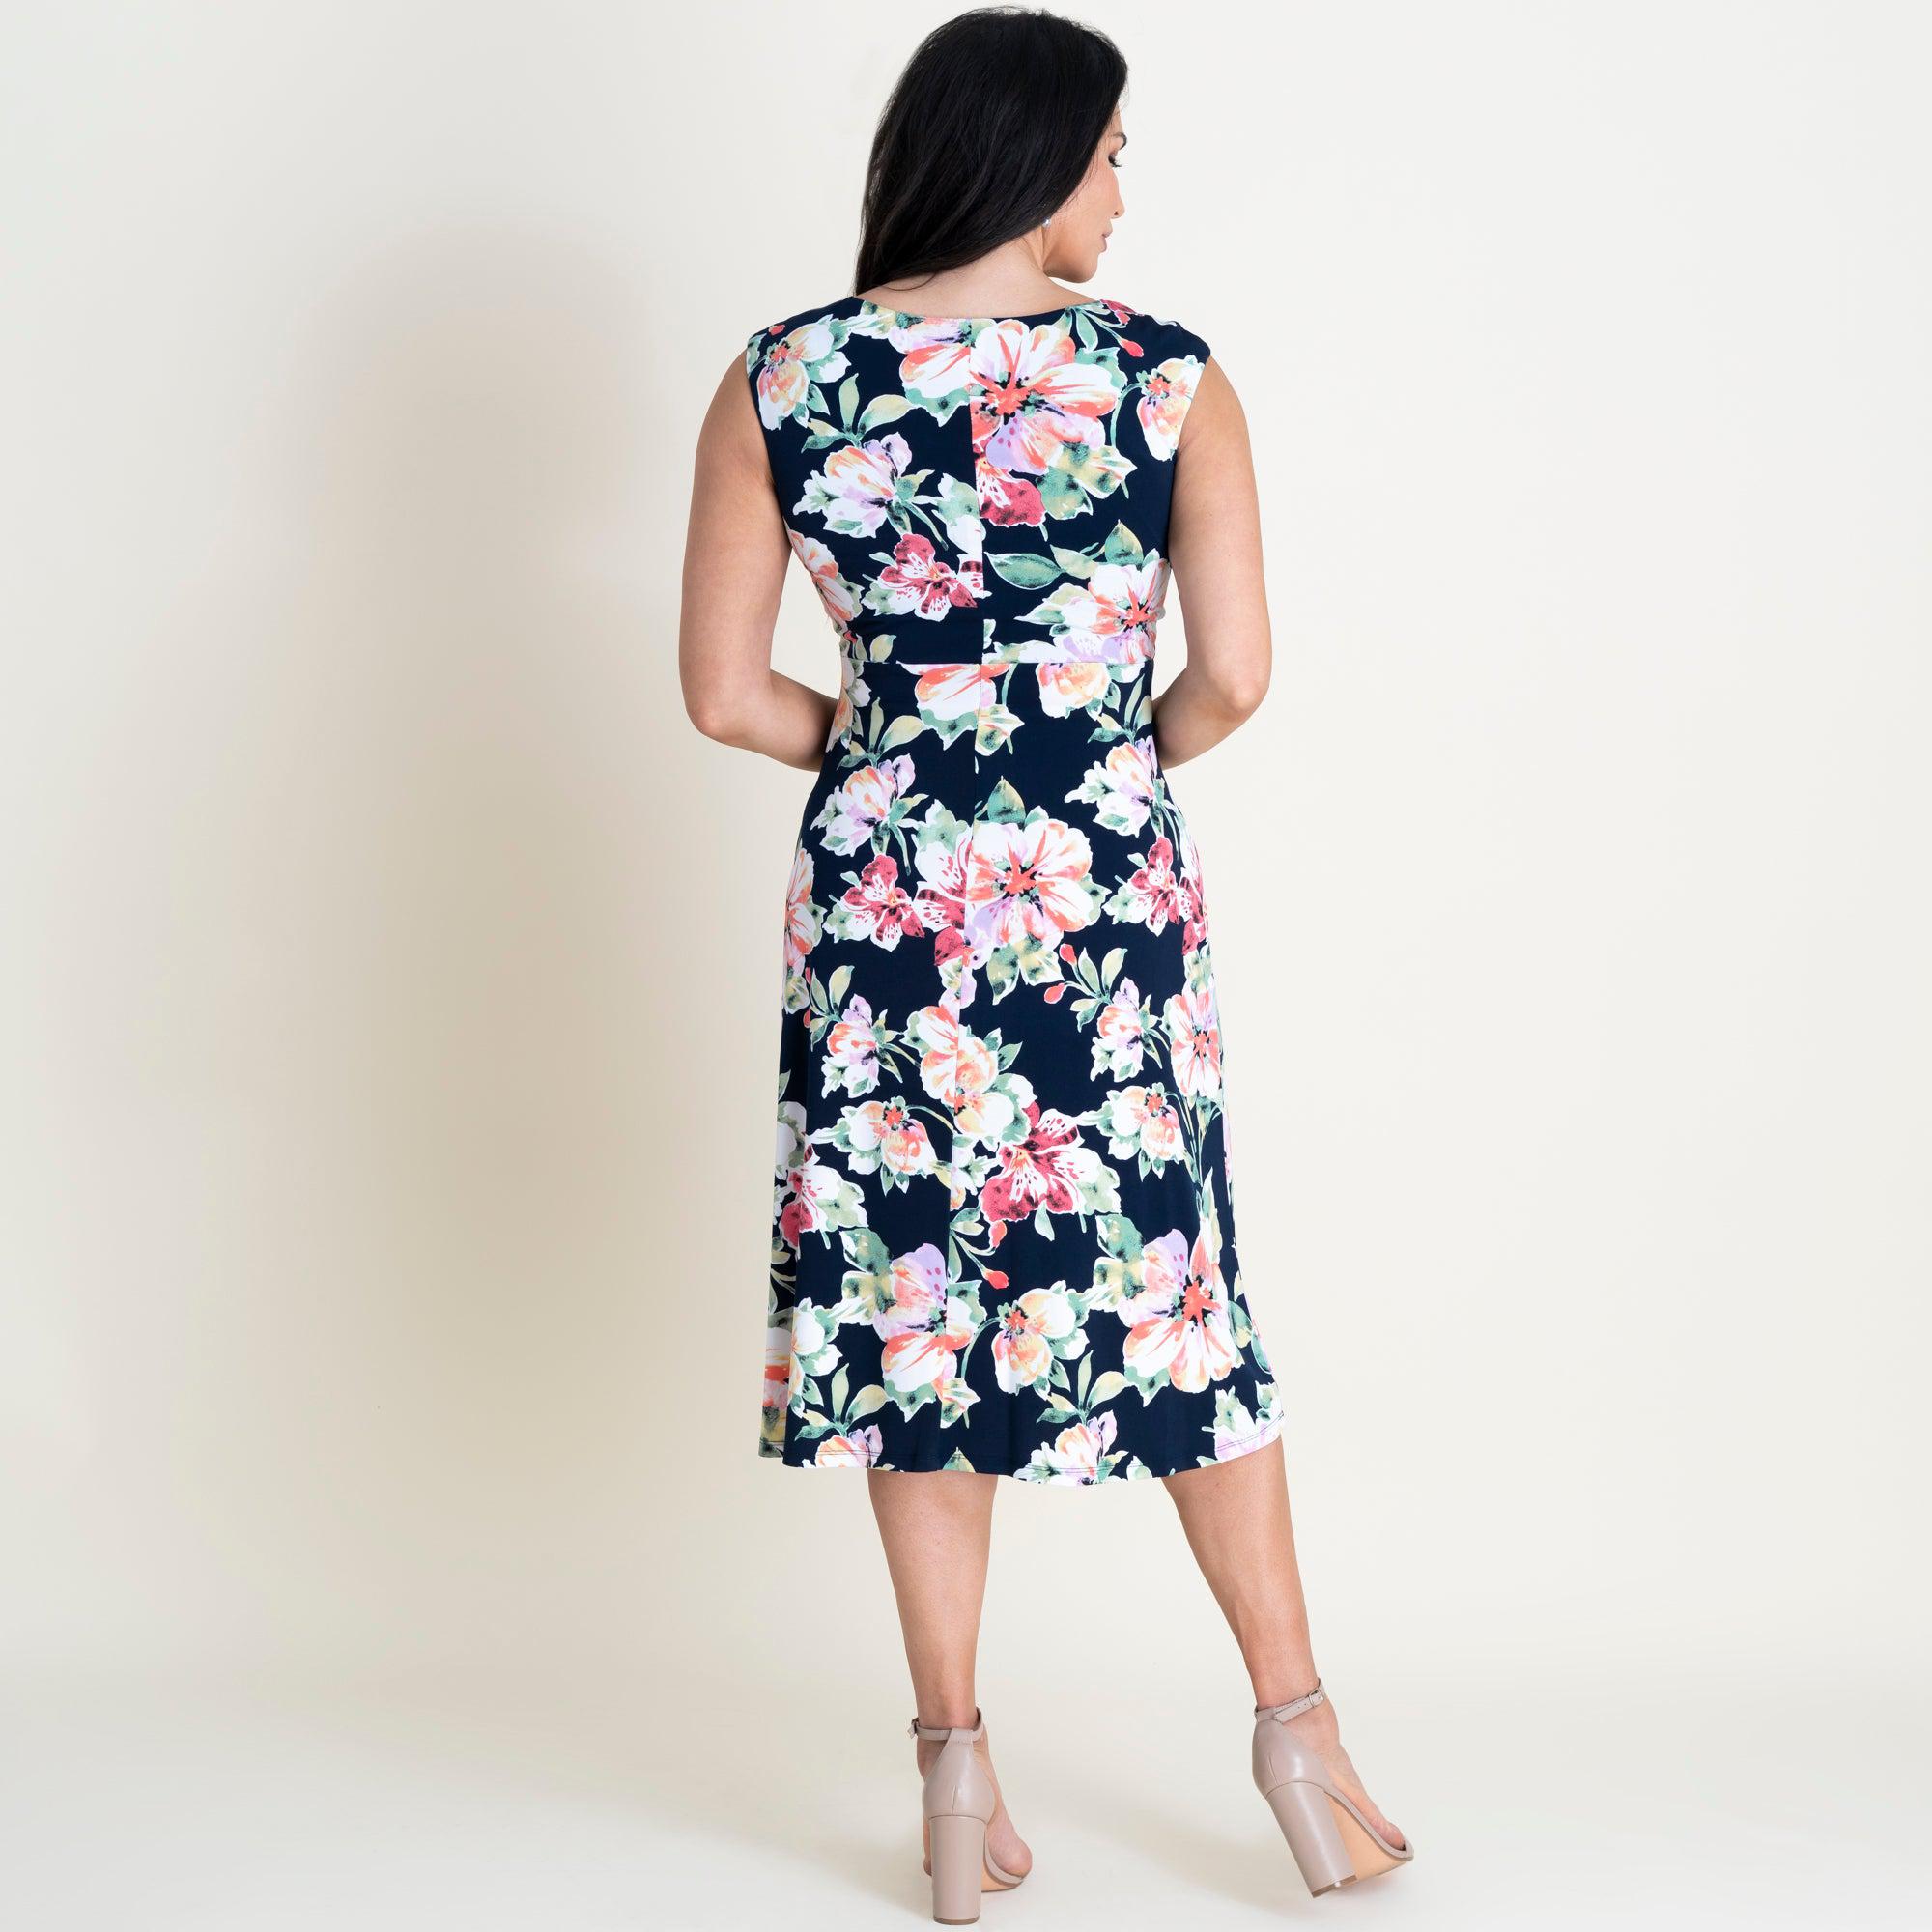 Woman posing wearing Navy Callie Knotted Fit and Flare Dress from Connected Apparel